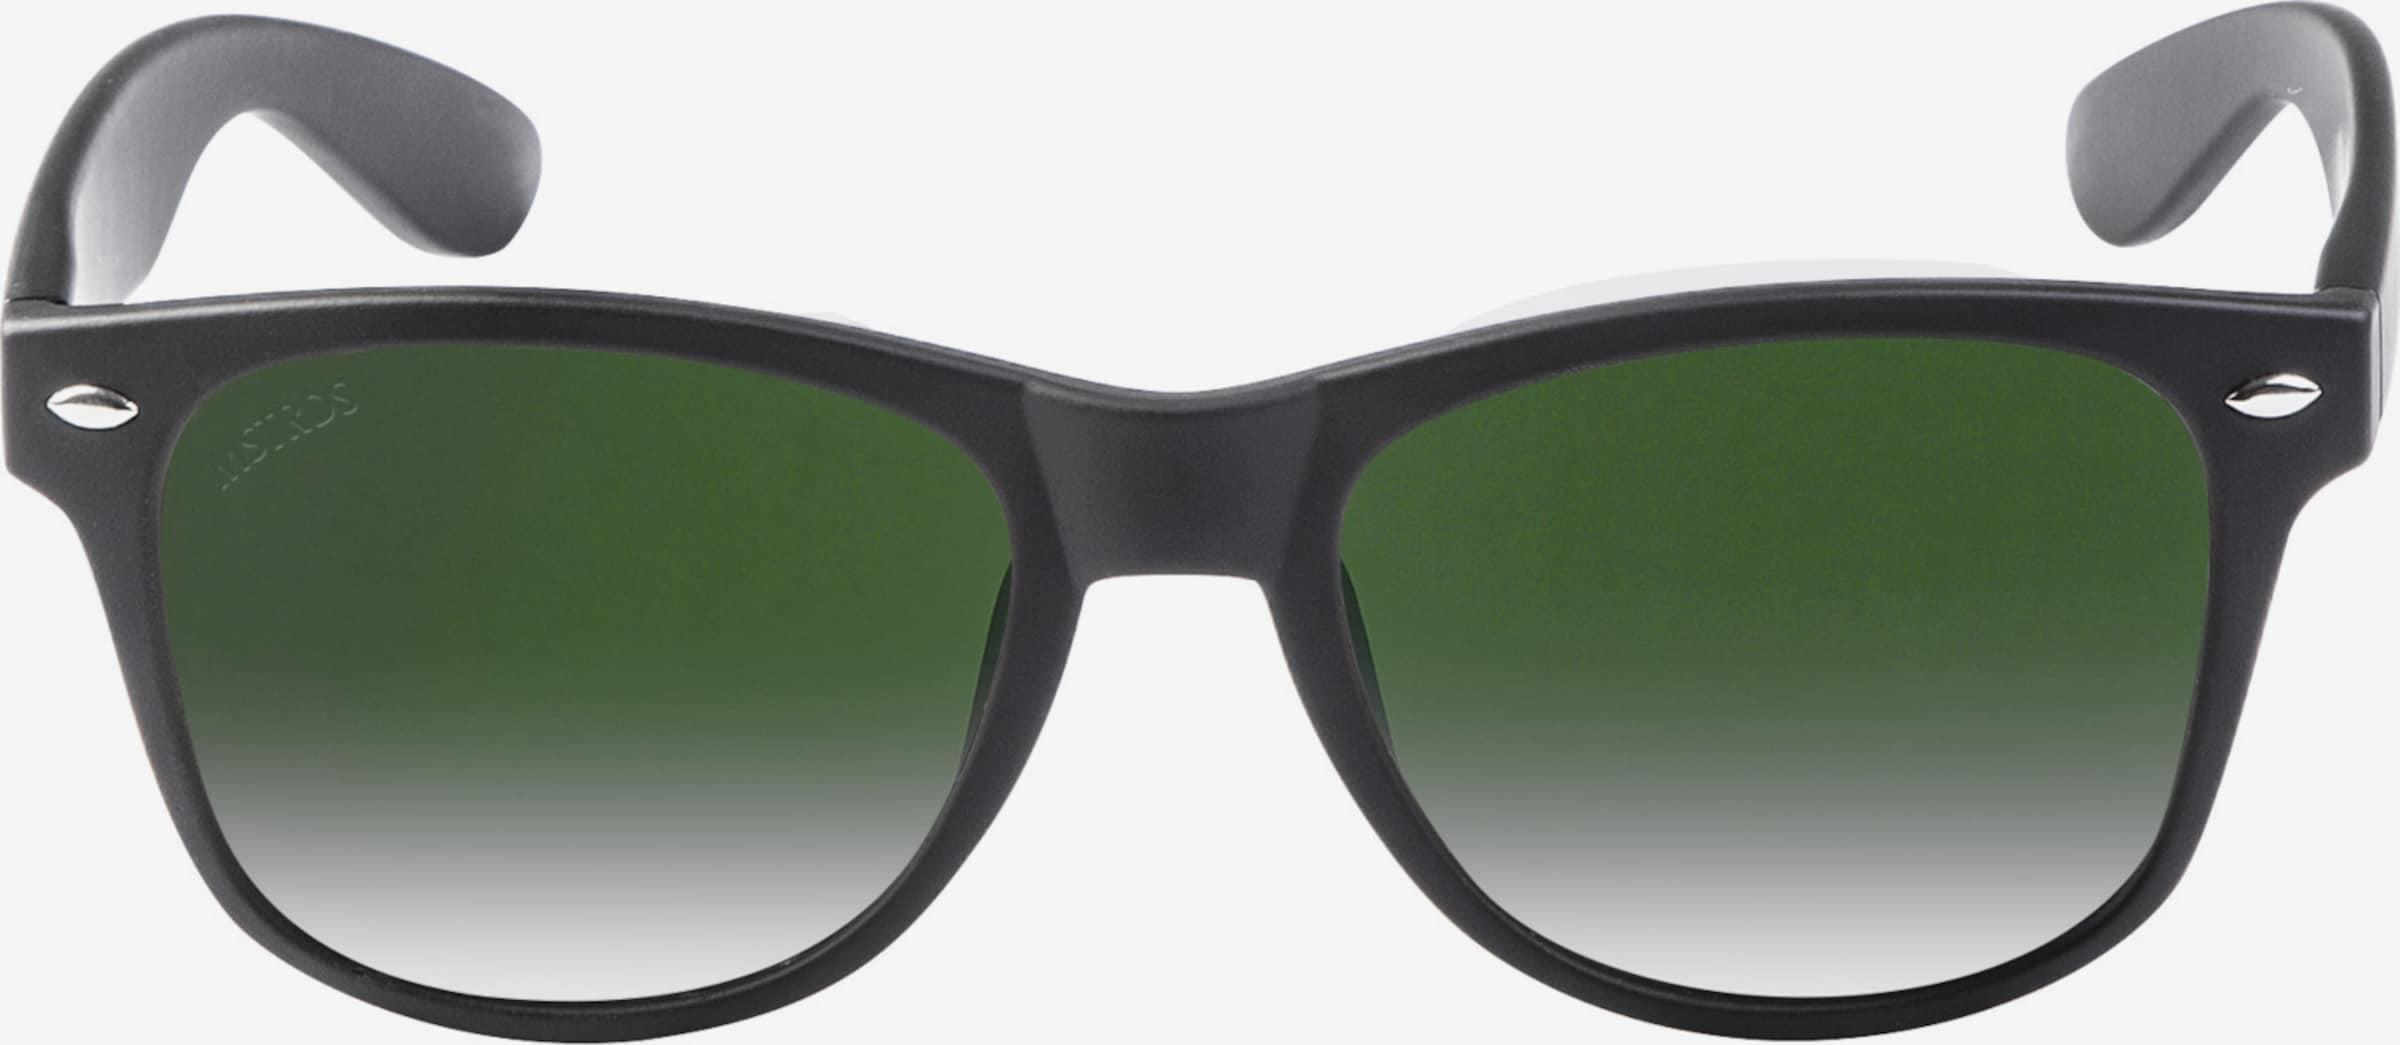 MSTRDS Sonnenbrille 'Likoma' in Schwarz | ABOUT YOU